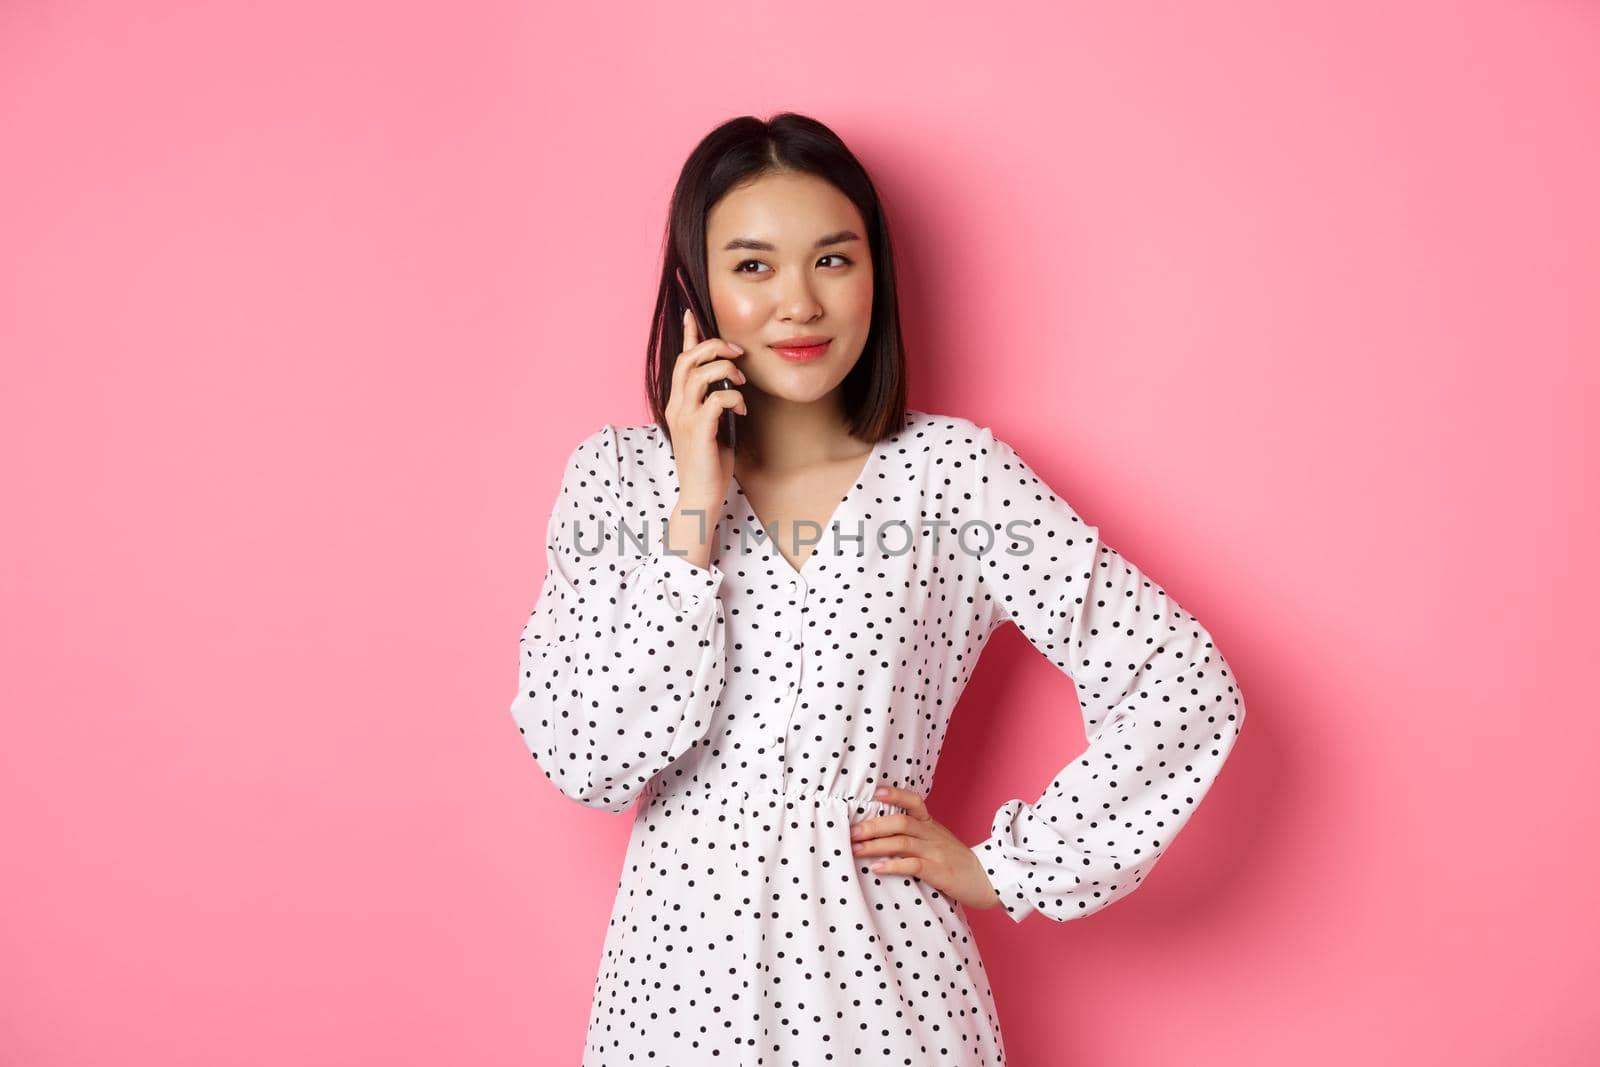 Attractive korean woman making a phone call, holding smartphone near ear and smiling, standing over pink background.